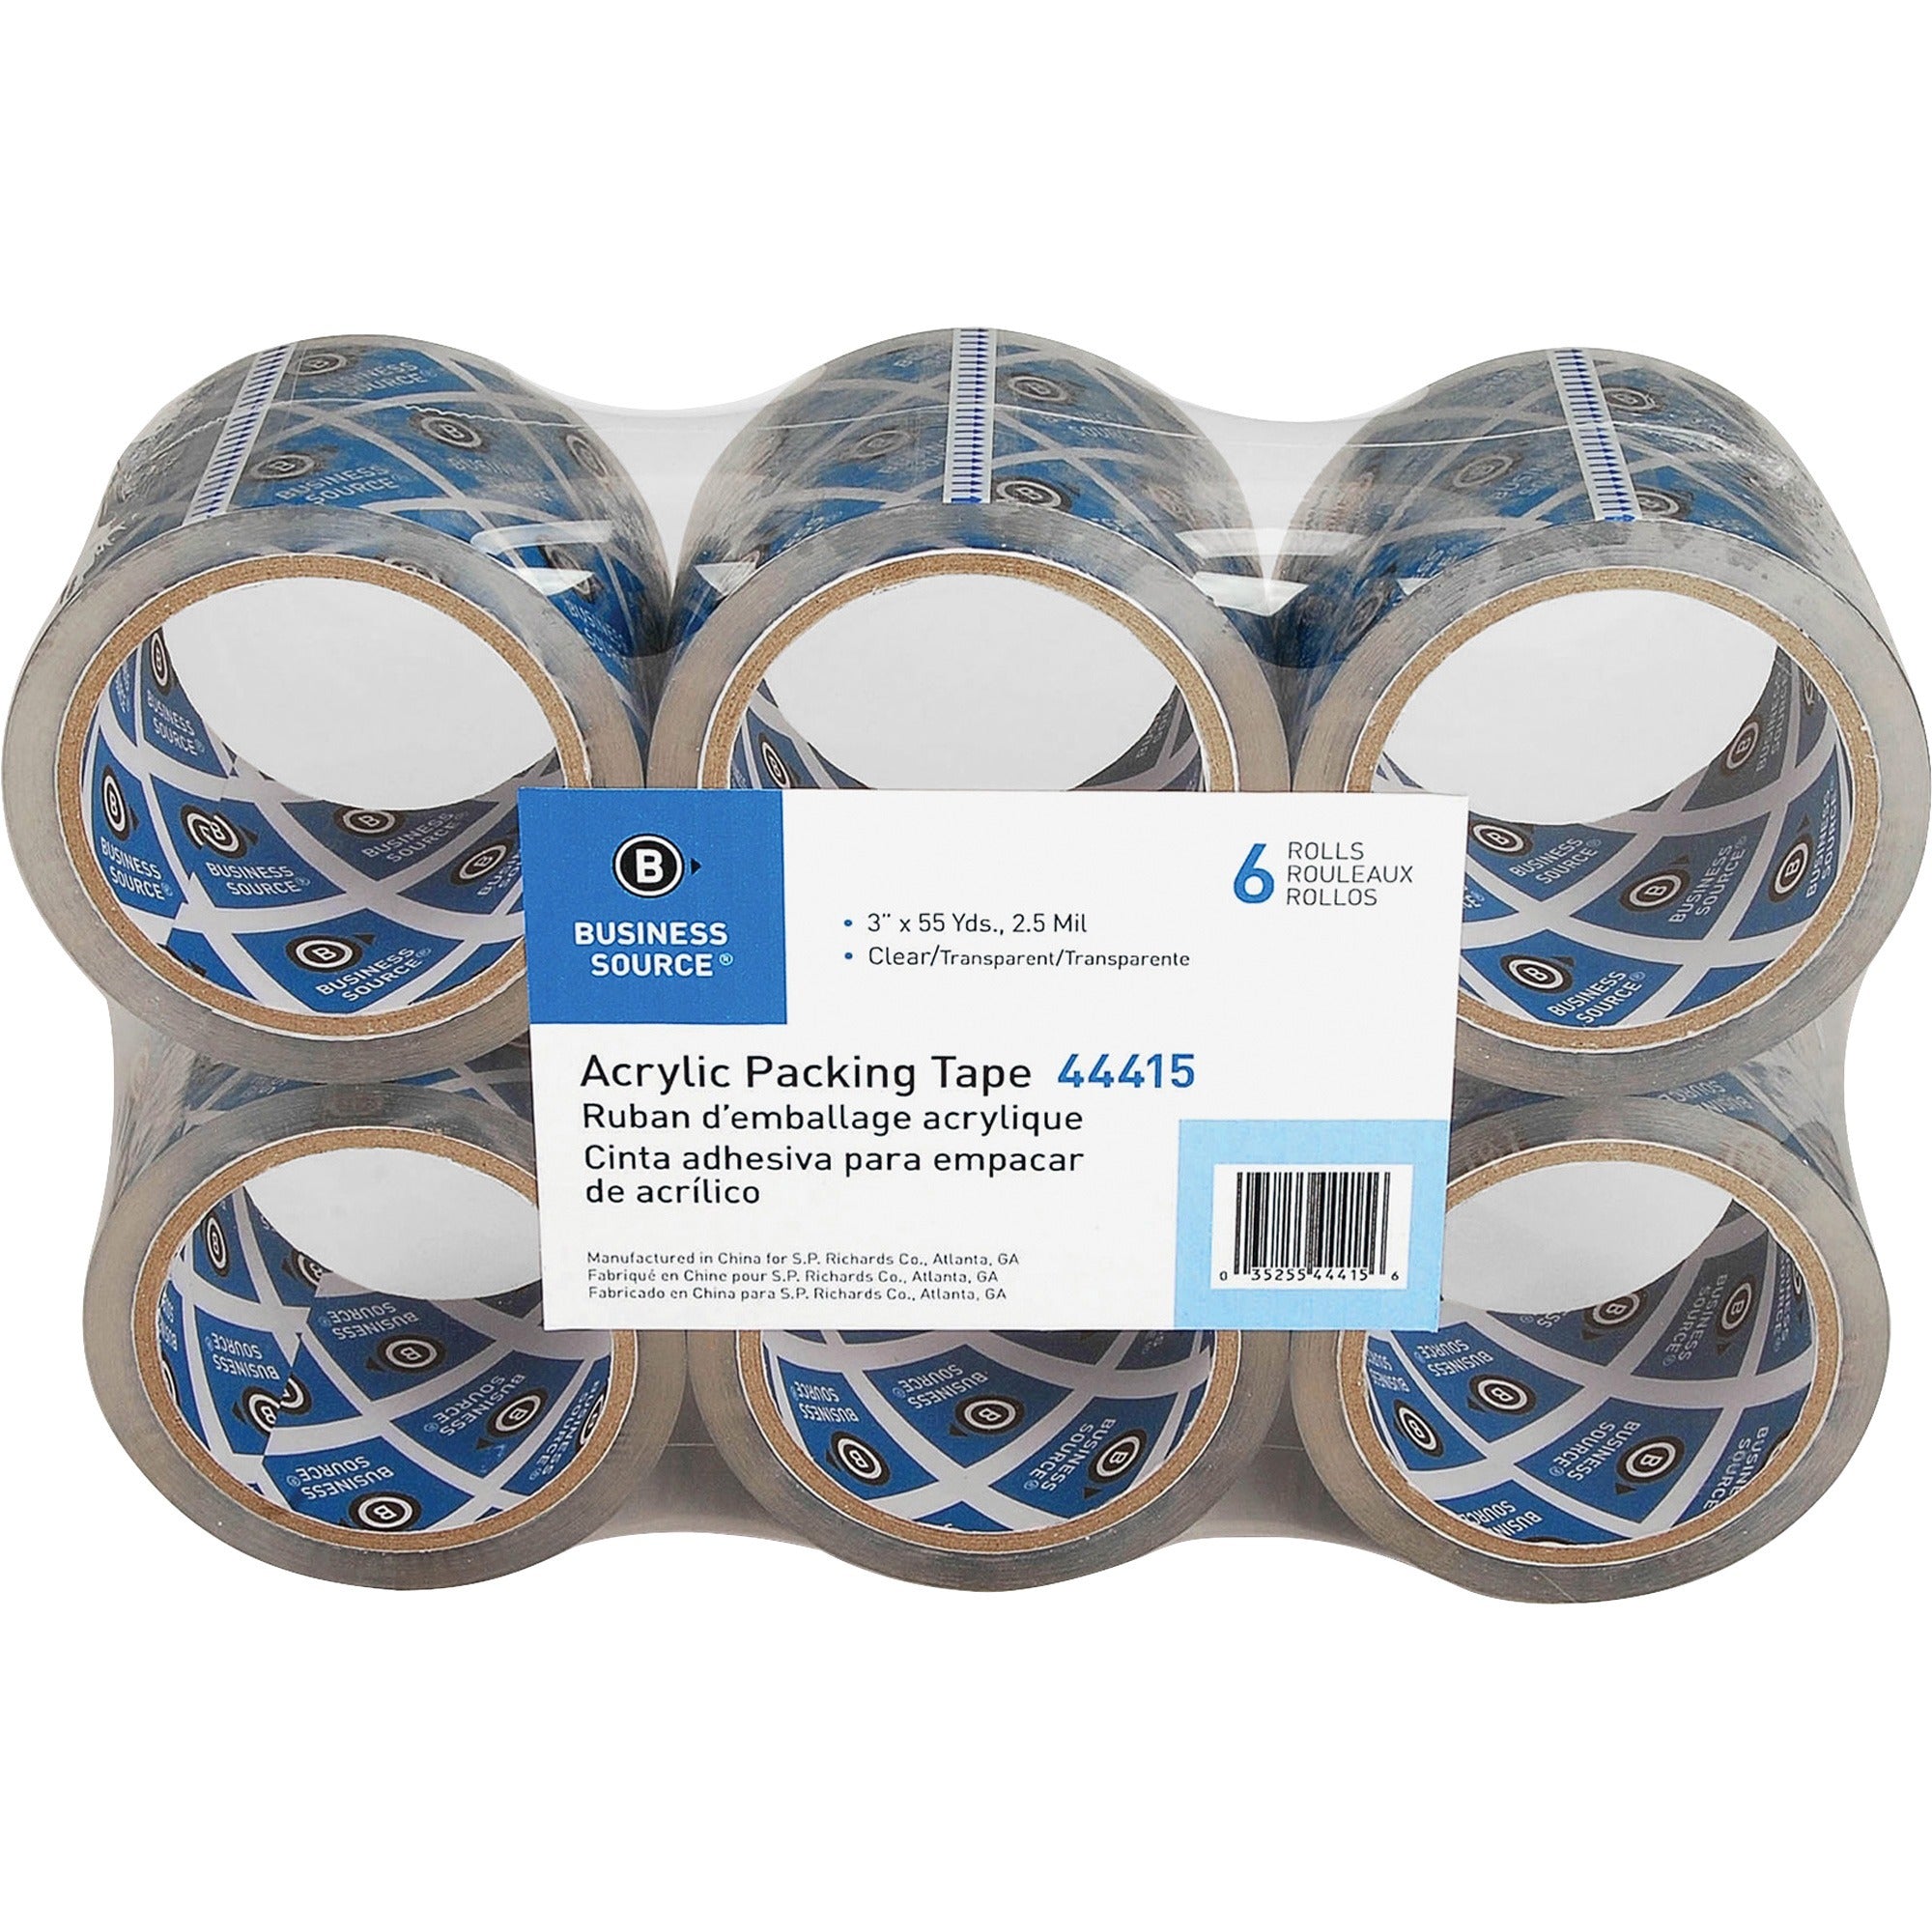 Business Source Acrylic Packing Tape - 55 yd Length x 3" Width - 2.5 mil Thickness - 3" Core - Pressure-sensitive Poly - Acrylic Backing - For Mailing, Shipping, Storing - 6 / Pack - Clear - 